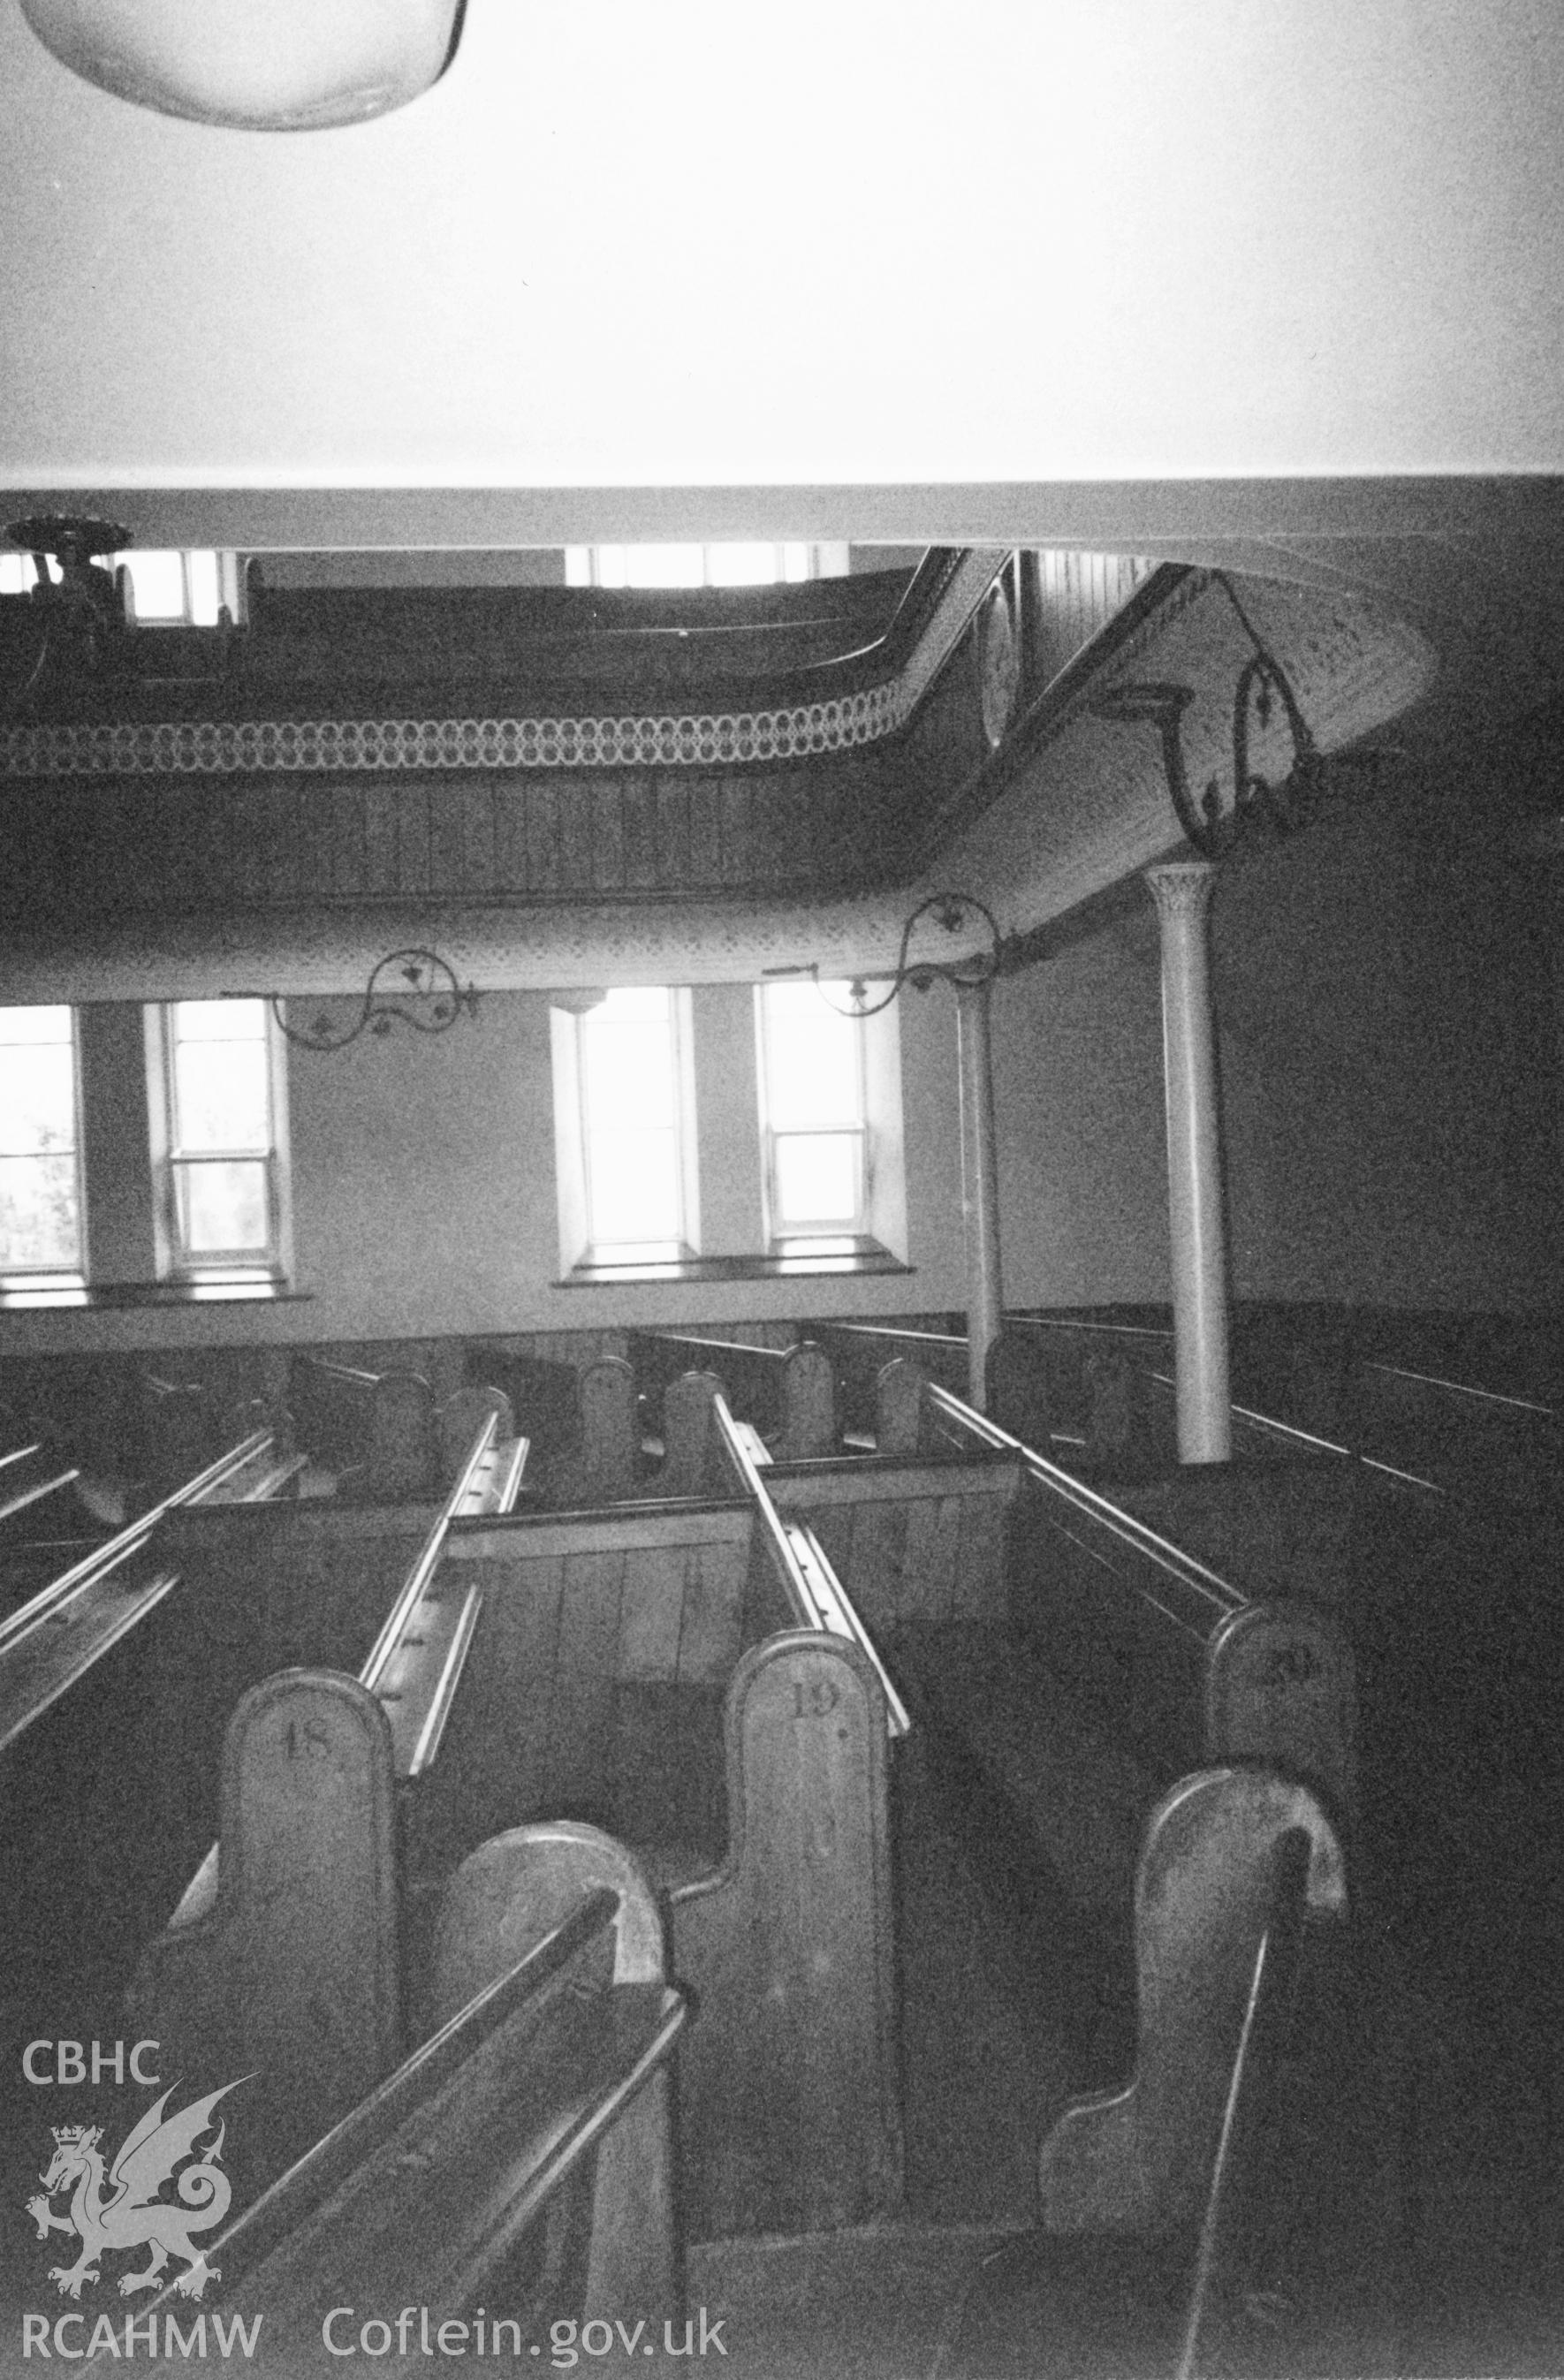 Digital copy of a black and white photograph showing an interior view of Ebeneser Welsh Independent Chapel, Llansadwrn, taken by Robert Scourfield, 1996.